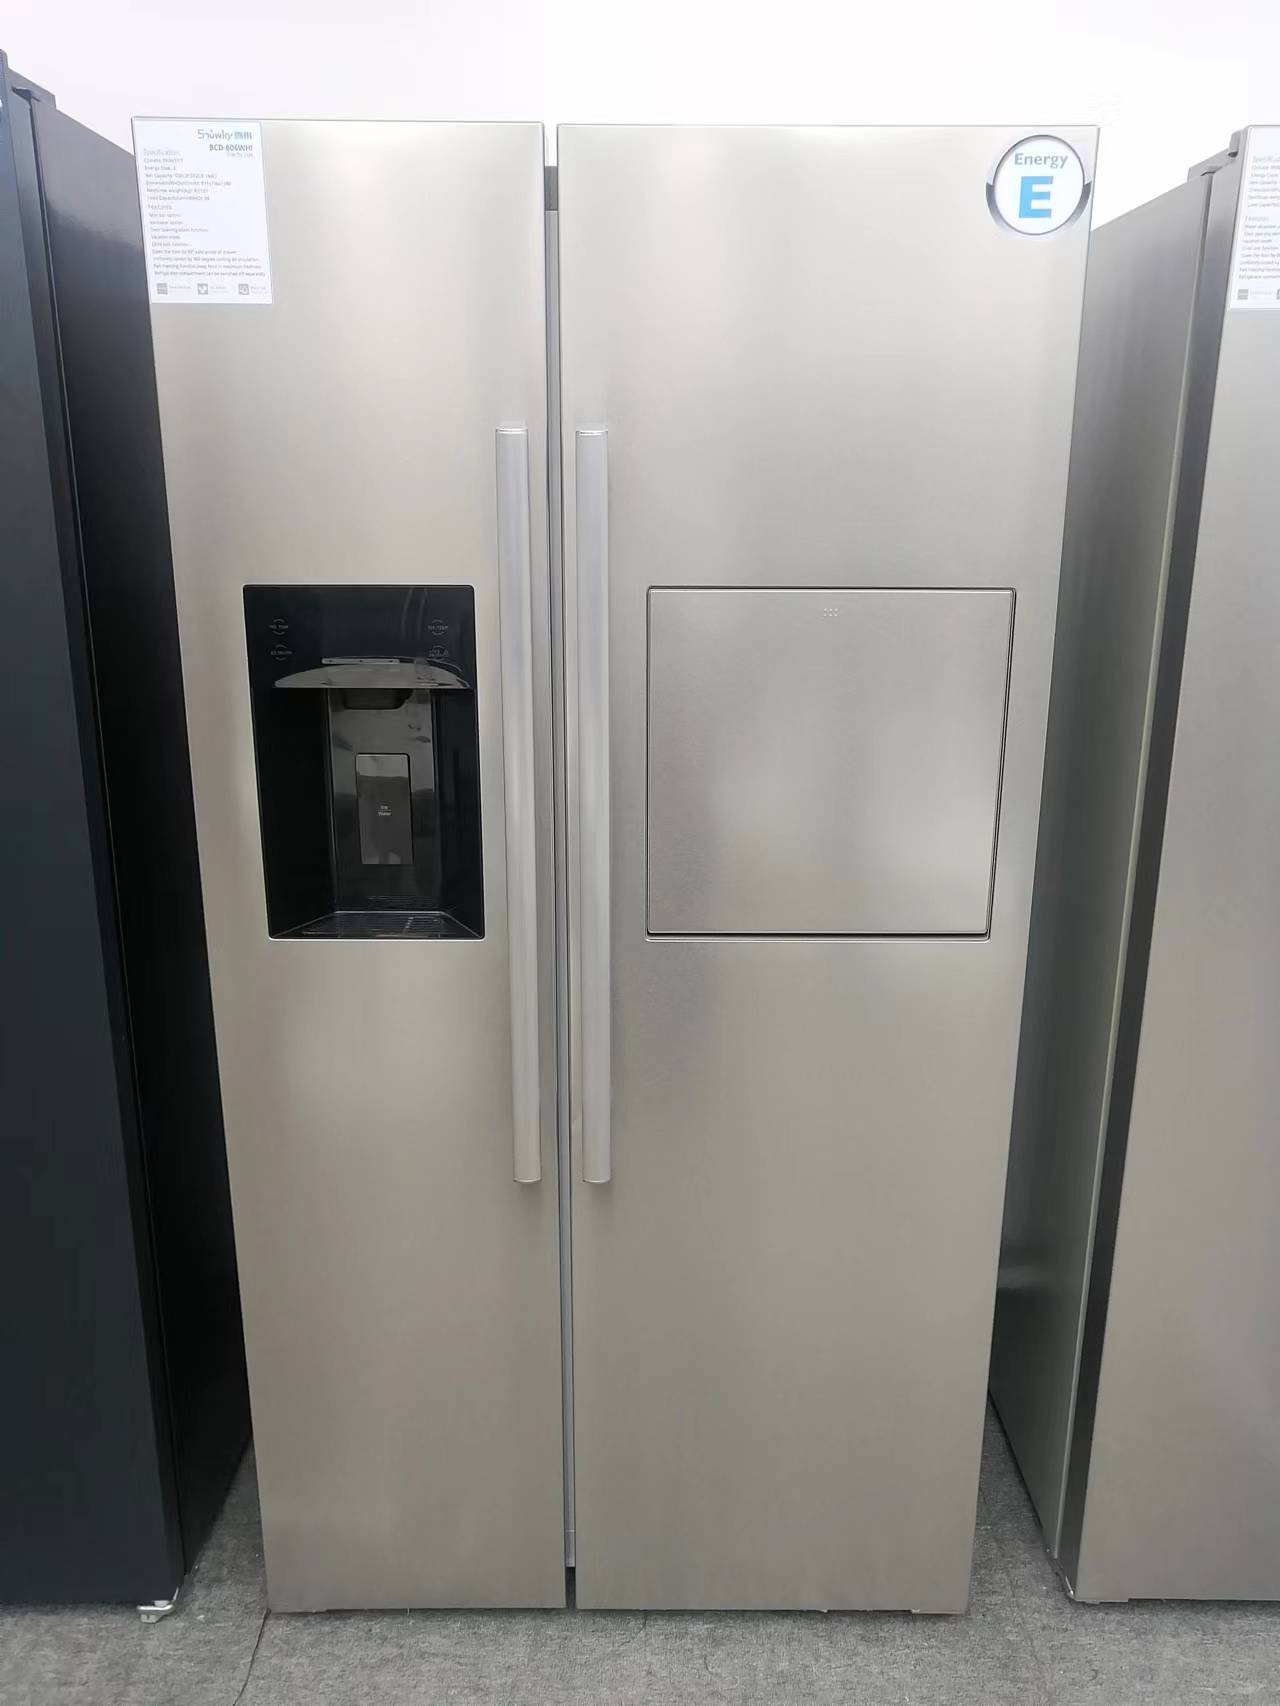 Side by Side refrigerator with automatic ice maker and bar model number BCD-606WHIT